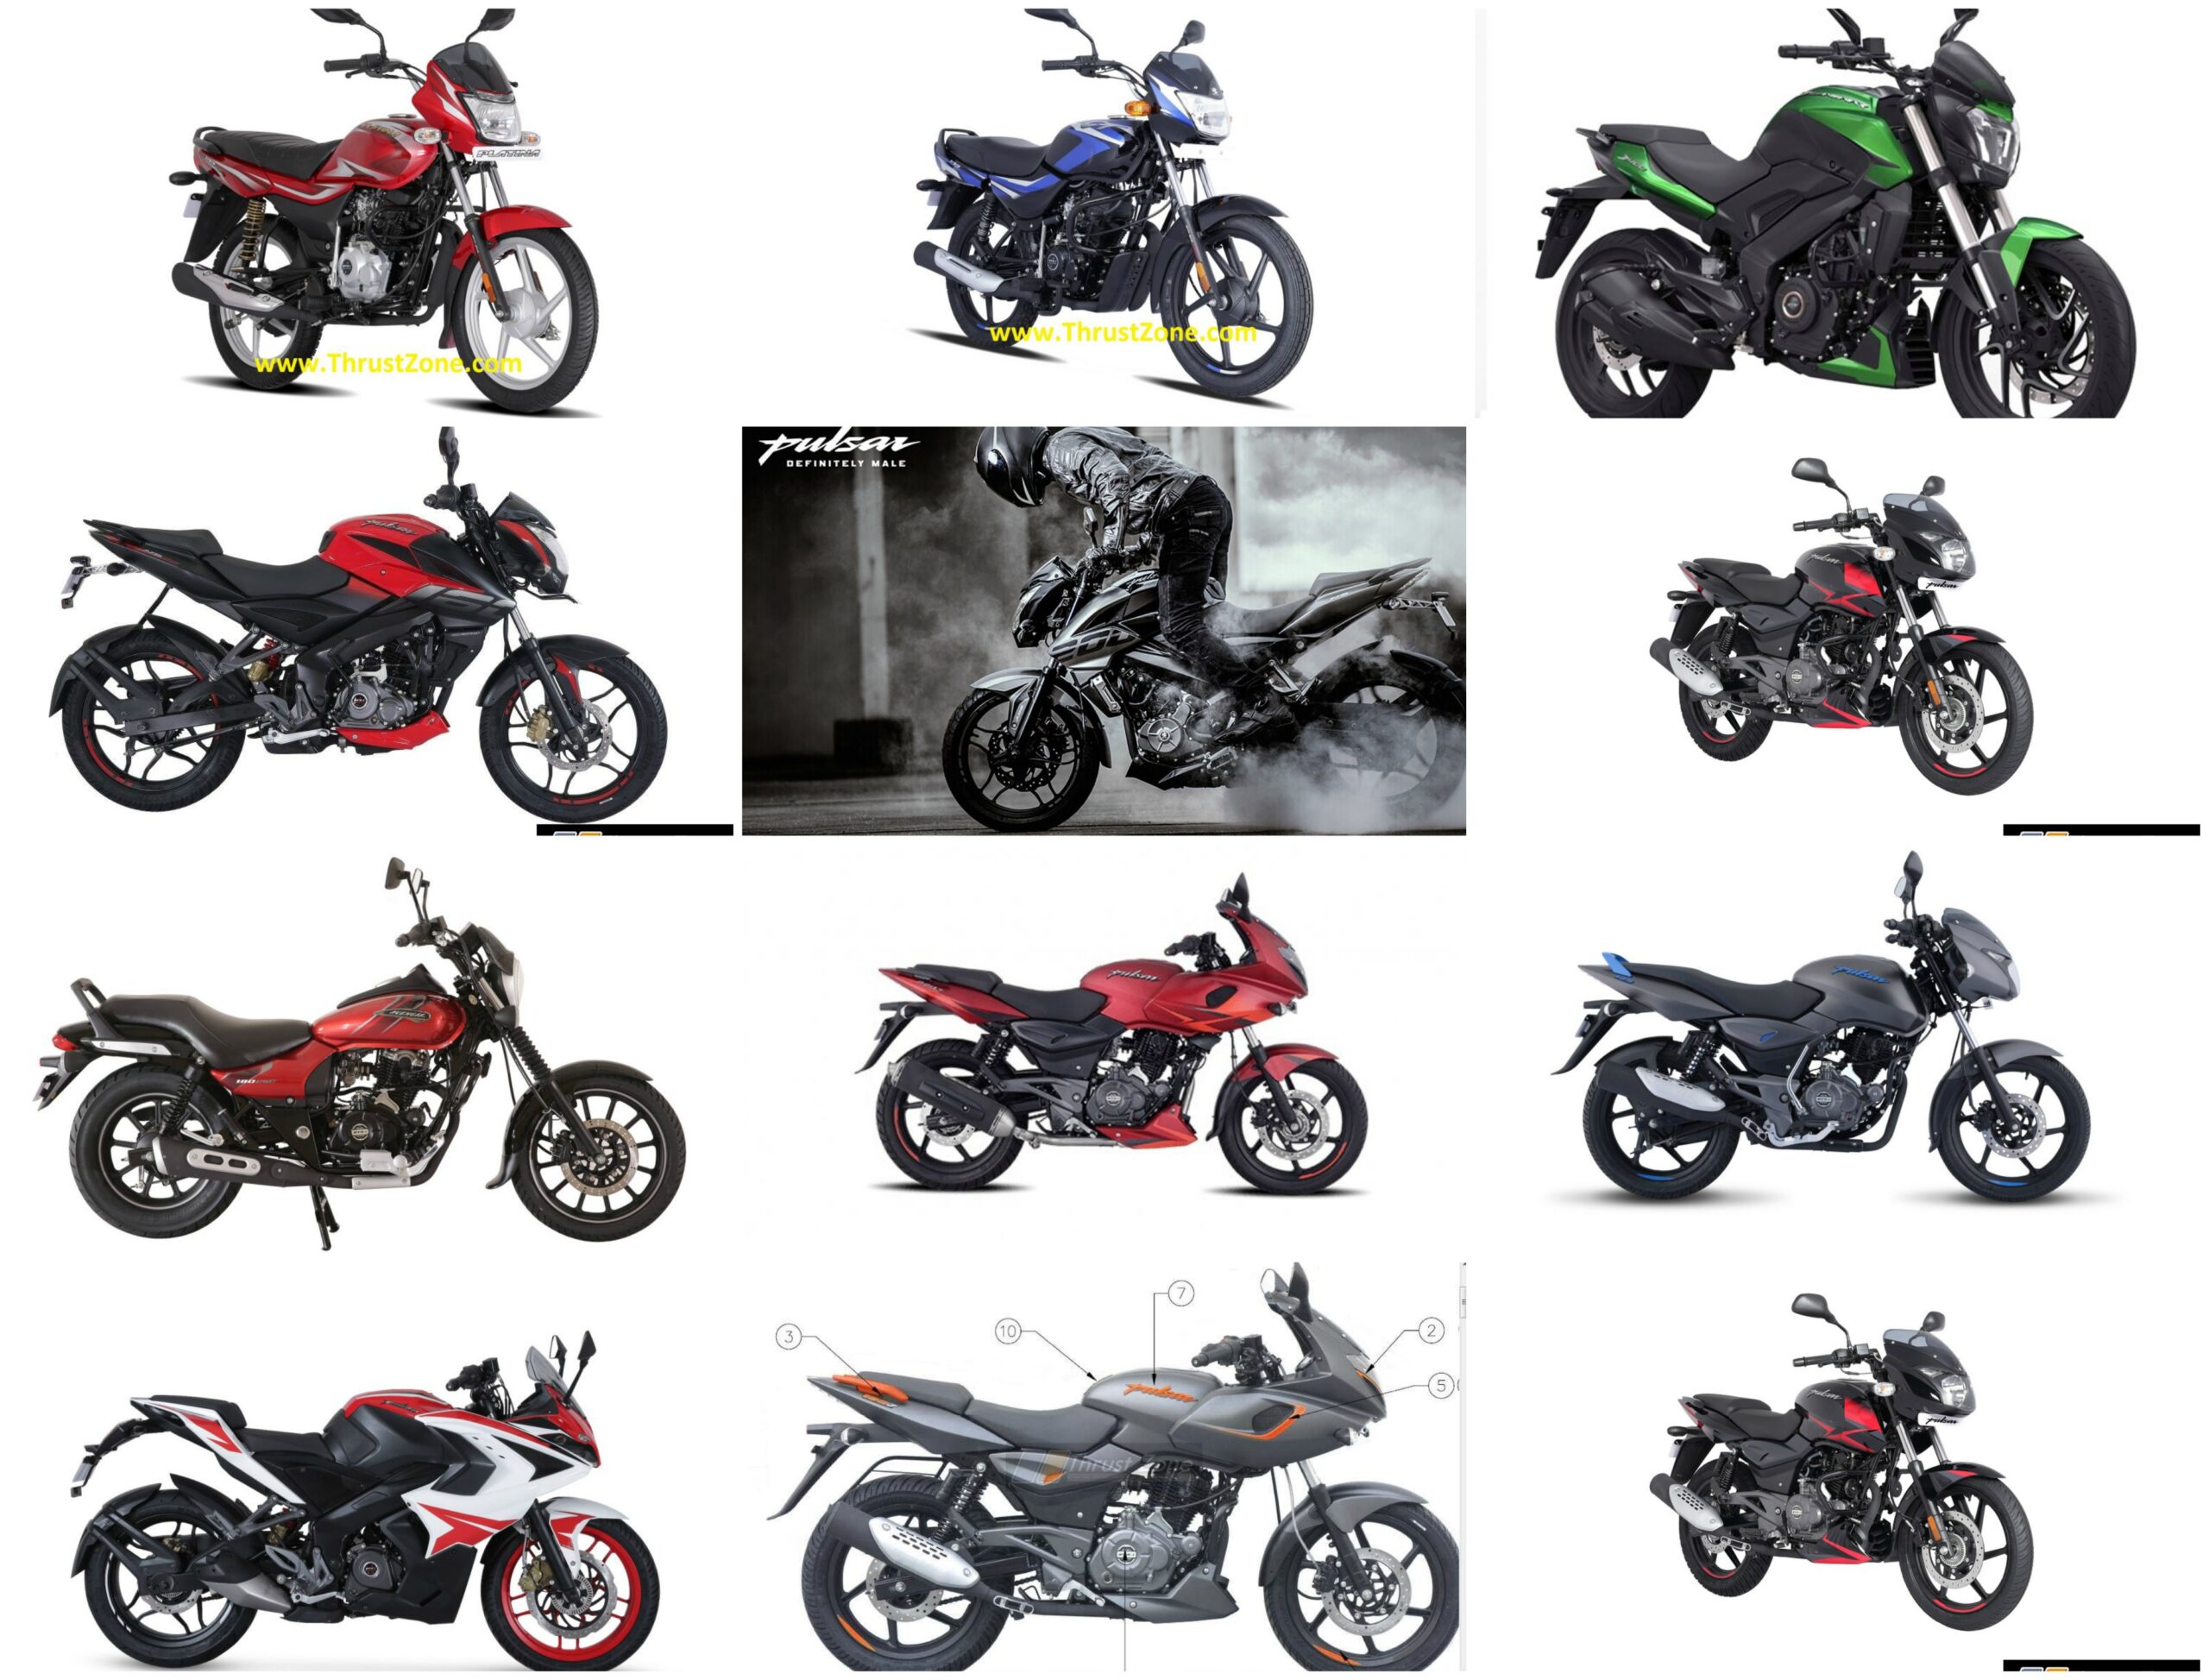 2020 Bajaj Bs6 Motorcycles Official Specifications And Prices